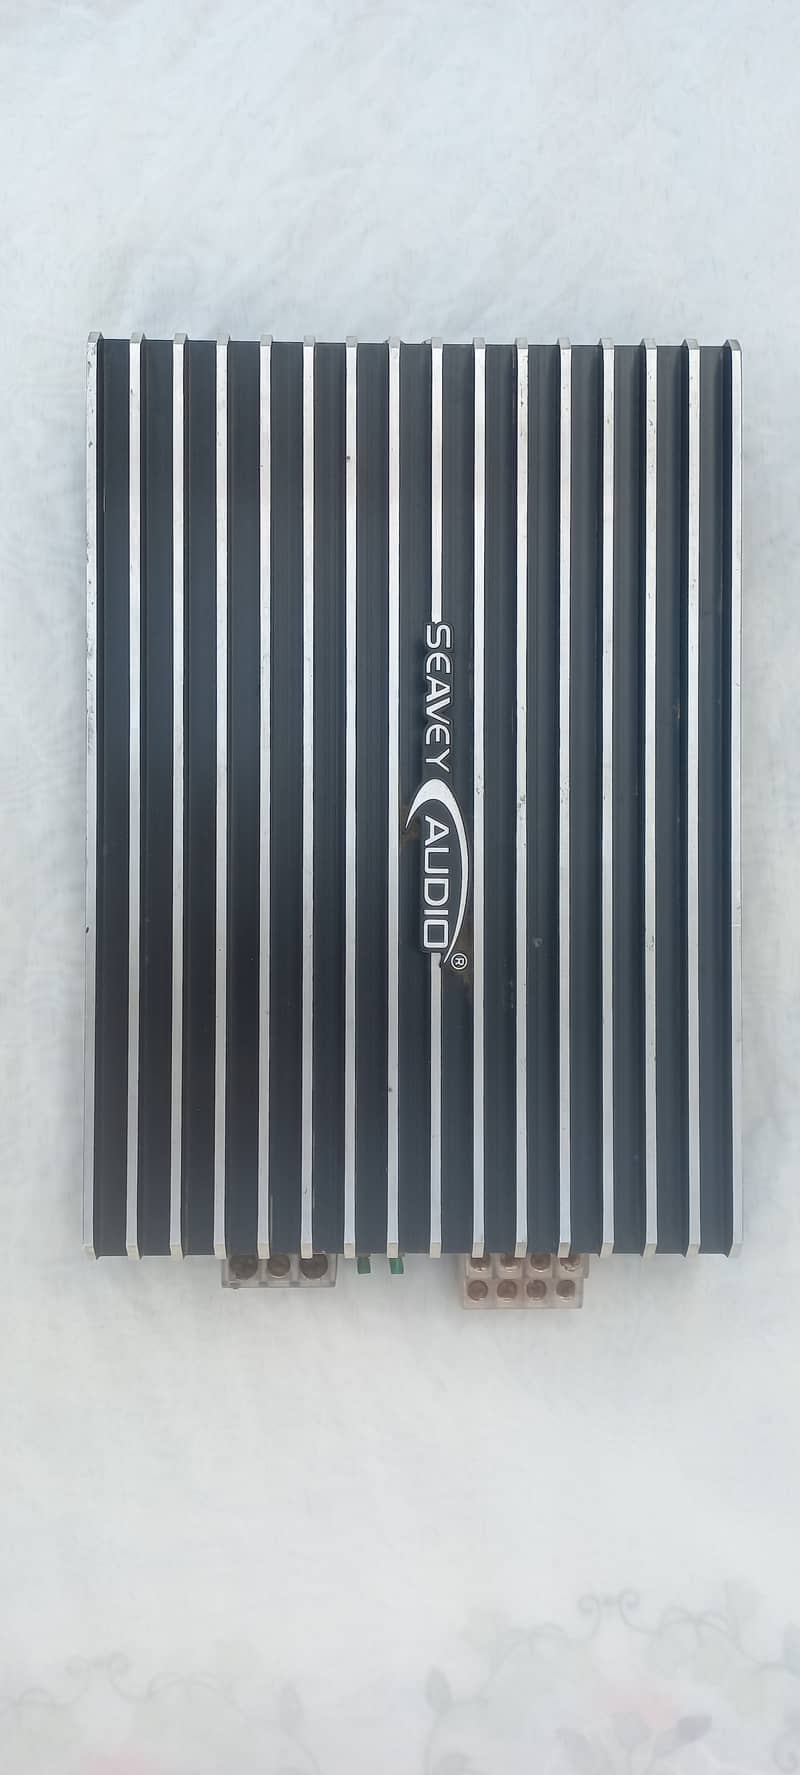 Seavey Audio SA-7045-4-CHANNEL MOSFET POWER AMPLIFIER 3